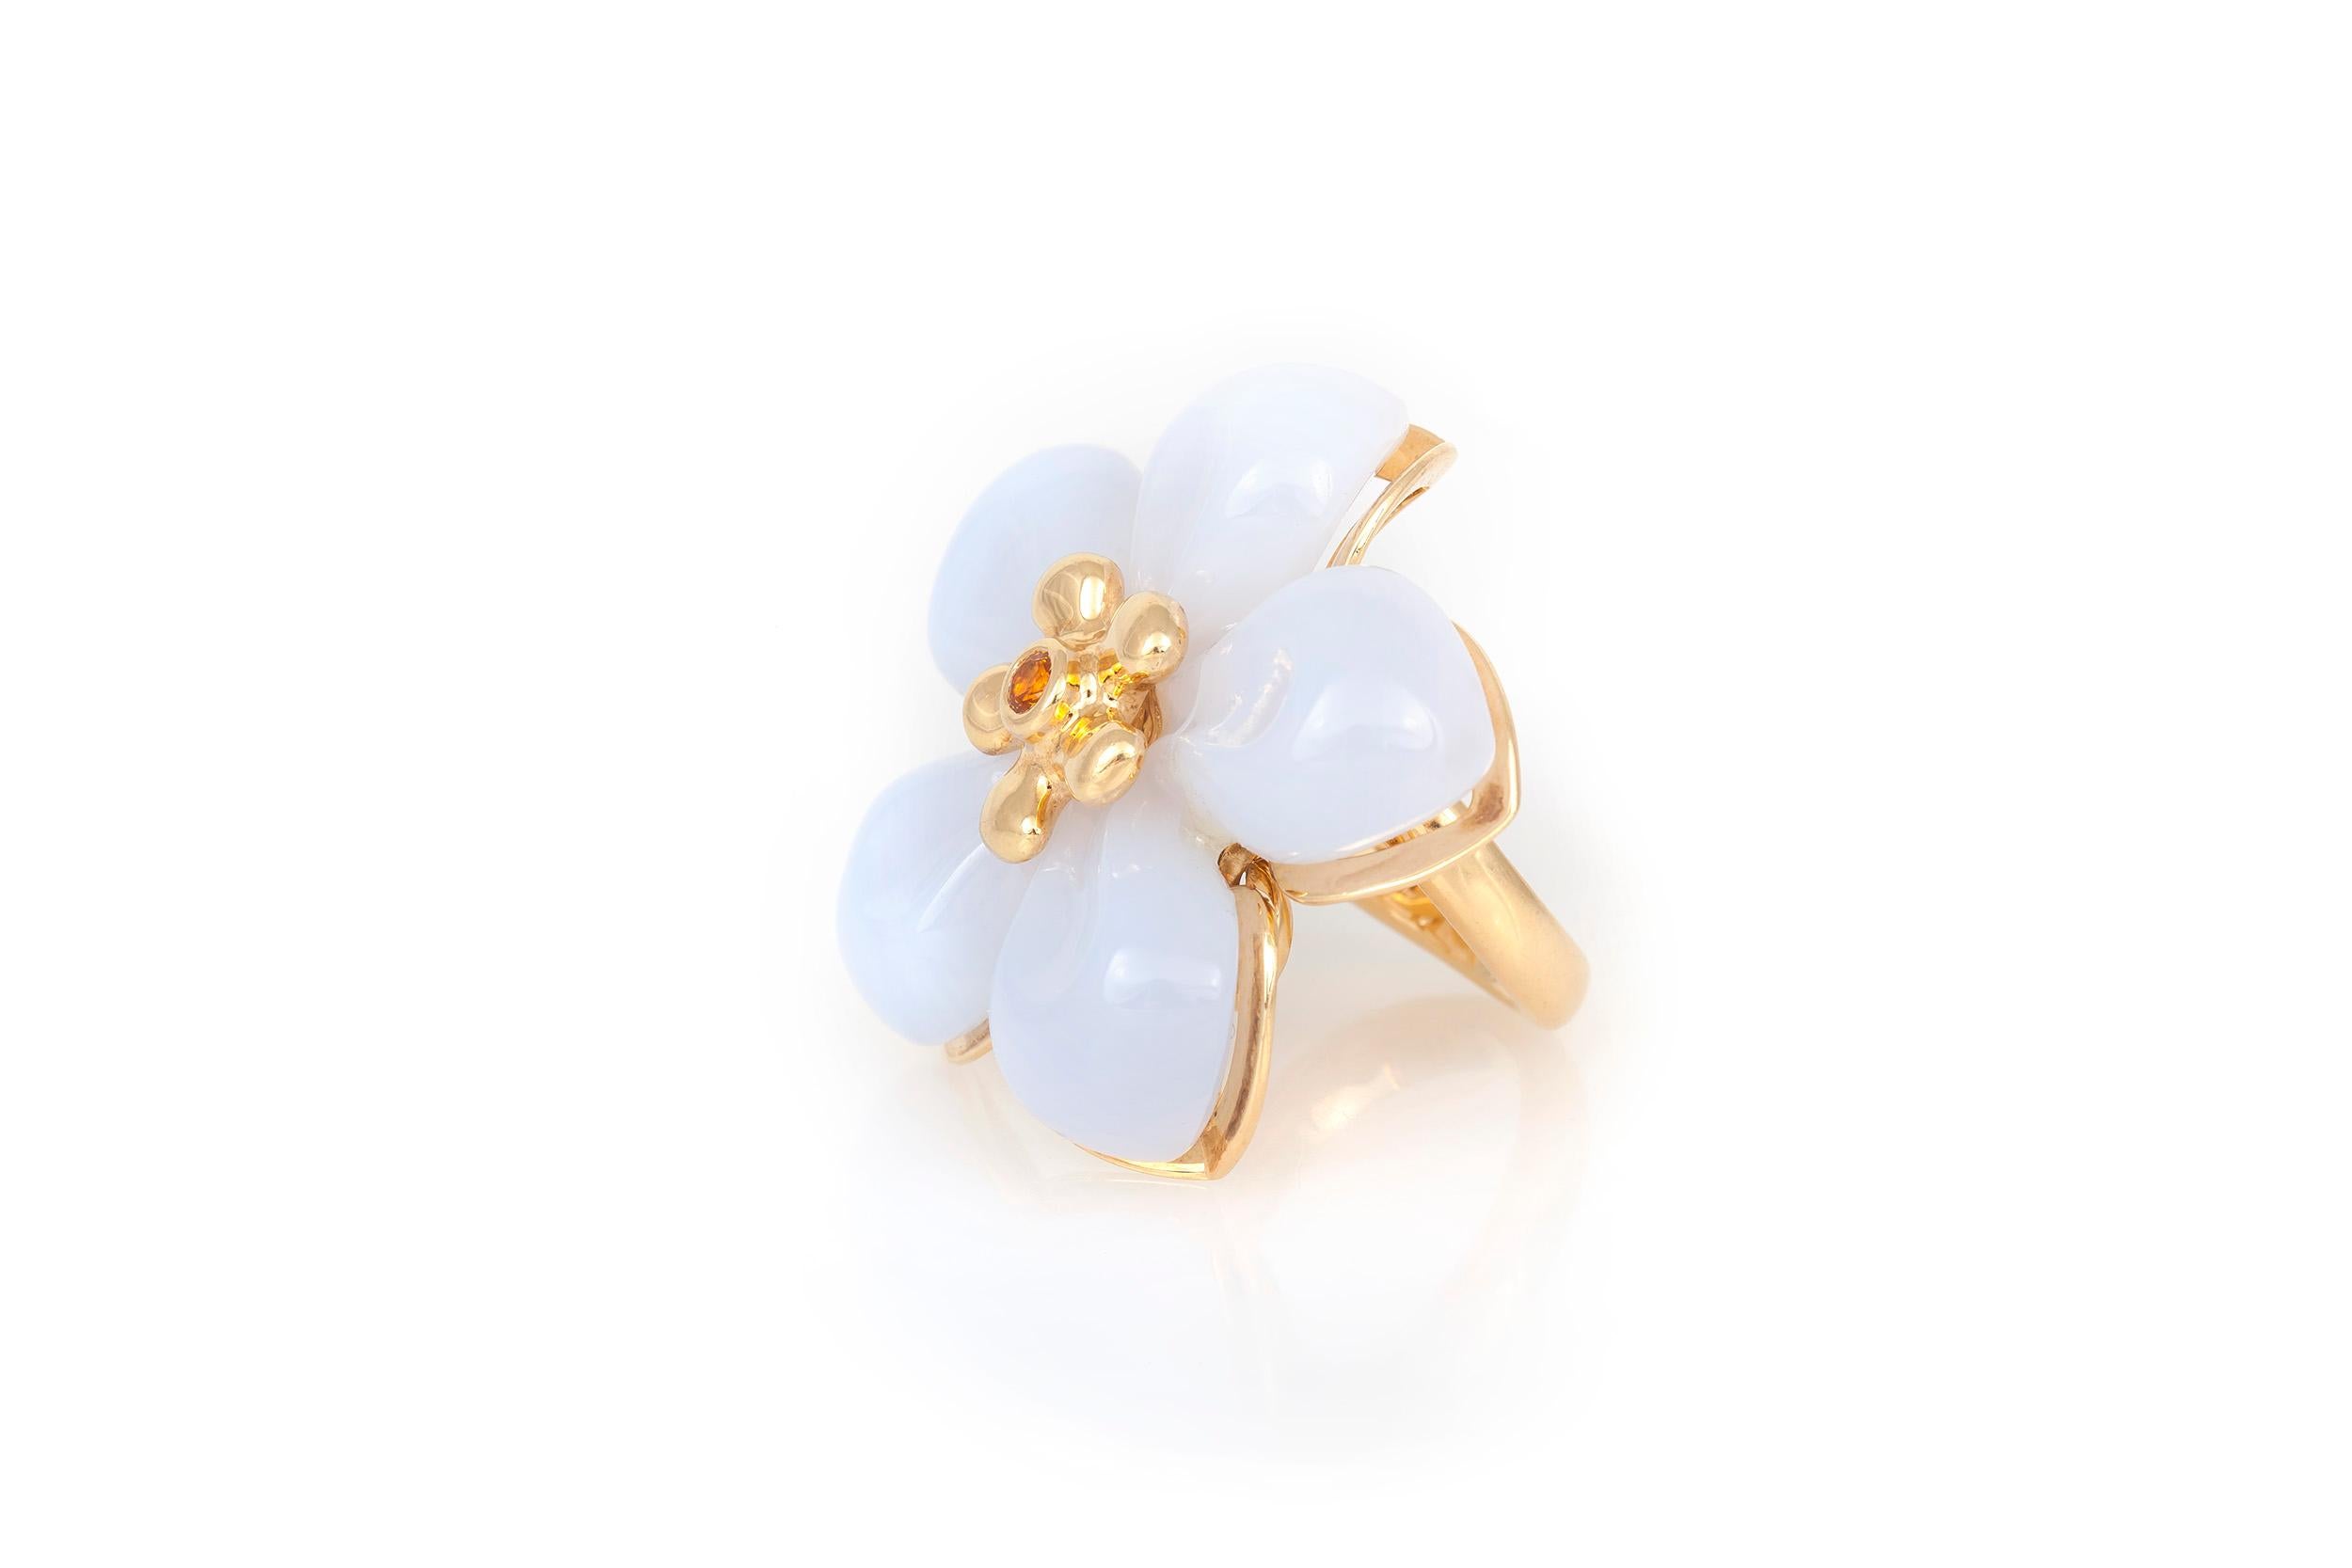 Stylish Dior Ring is made of 18K yellow gold and white jade as petals with a charming yellow sapphire at the center. Ring size 6.